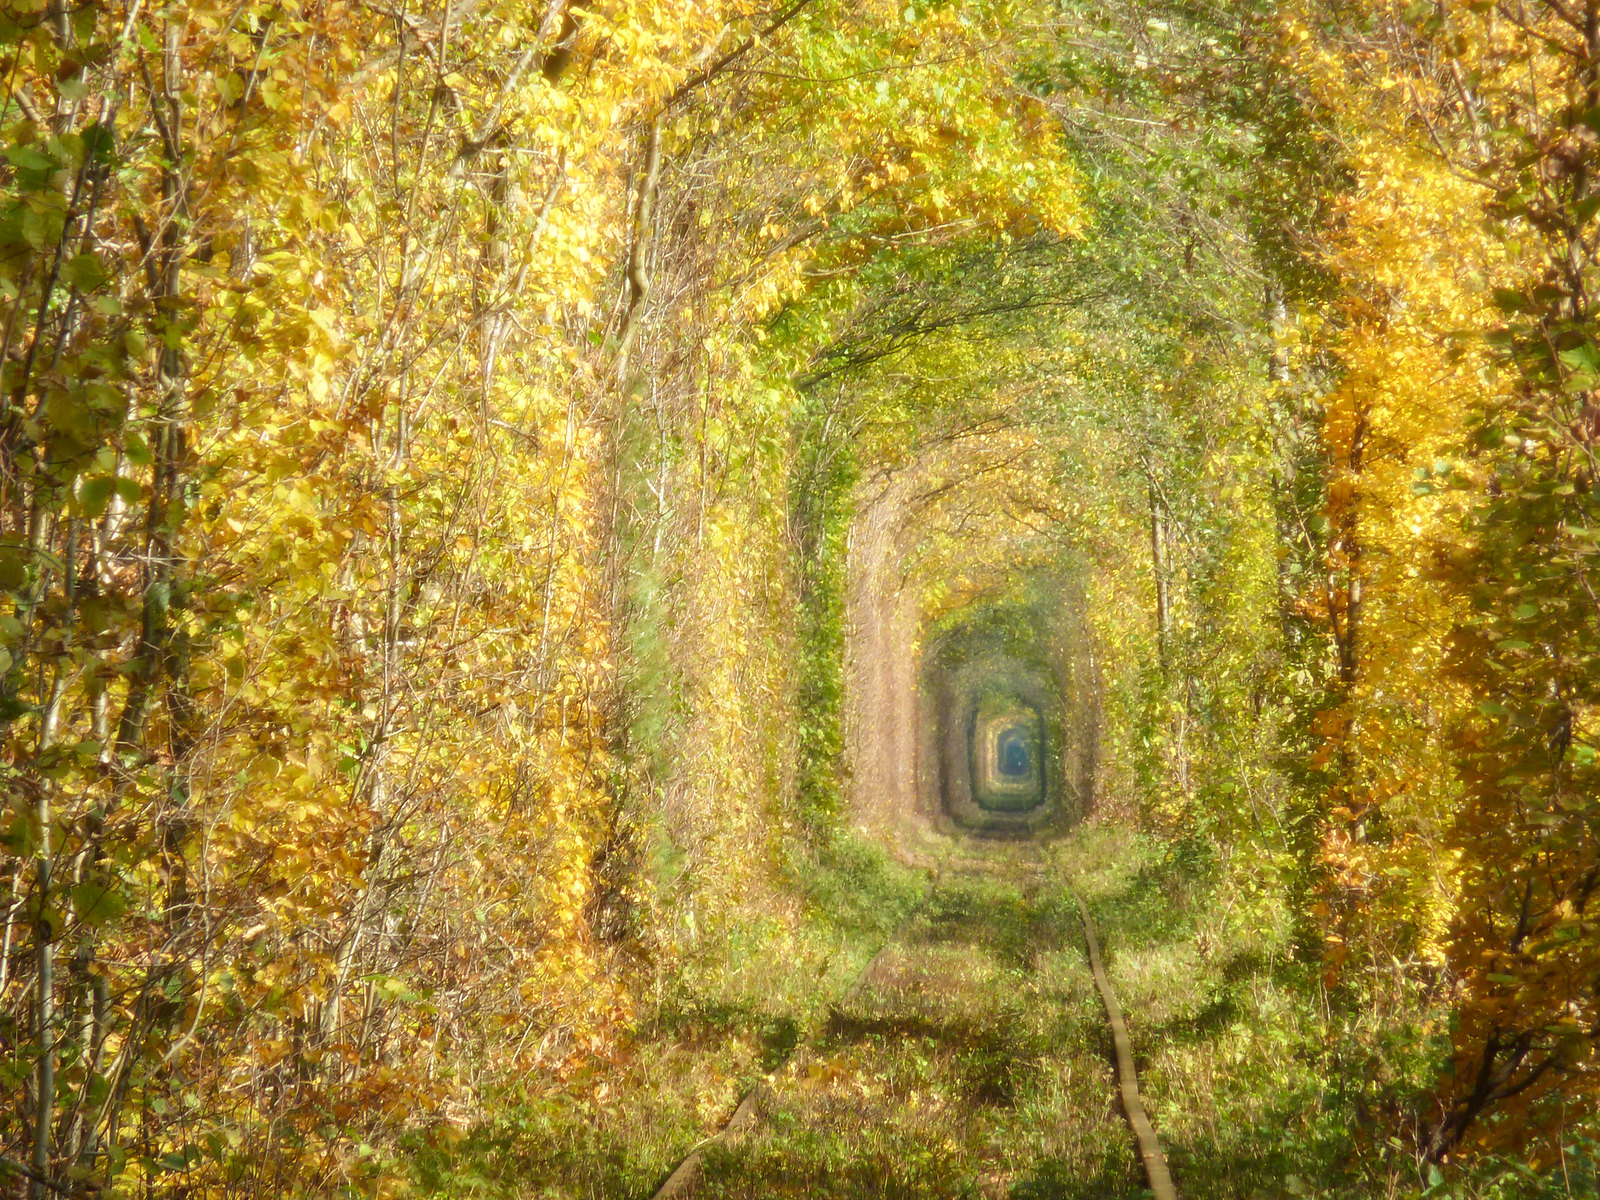 A Place Where Love Remains Eternal - Tunnel Of Love